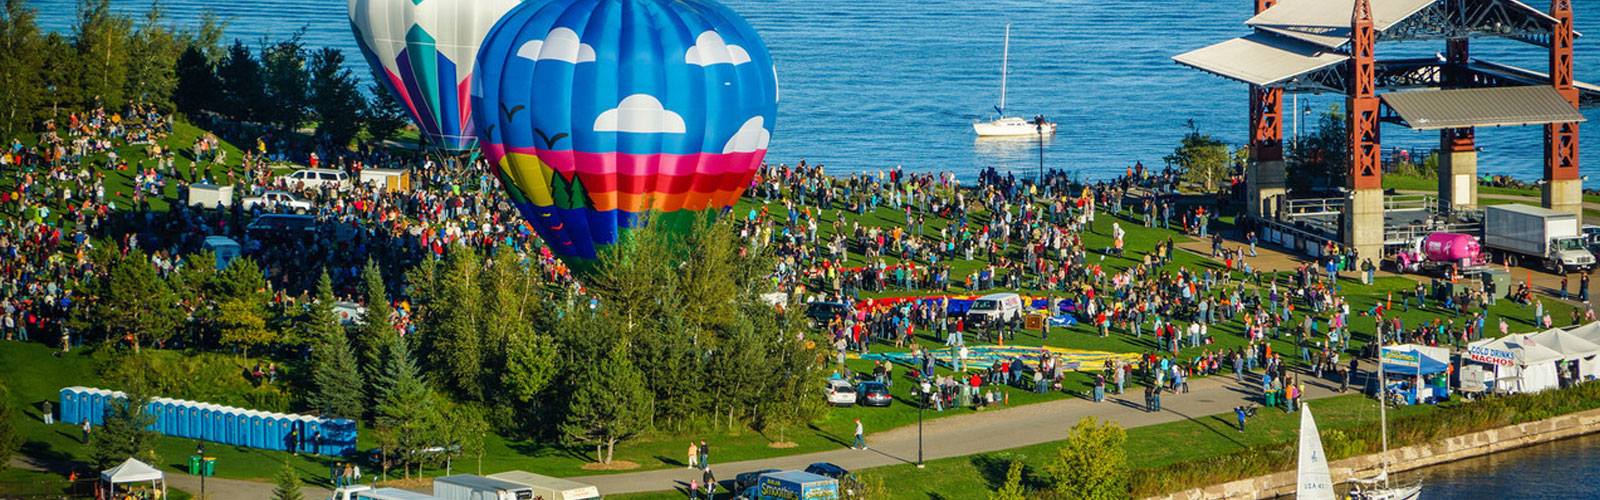 Events Schedule for Canal Park, Duluth MN